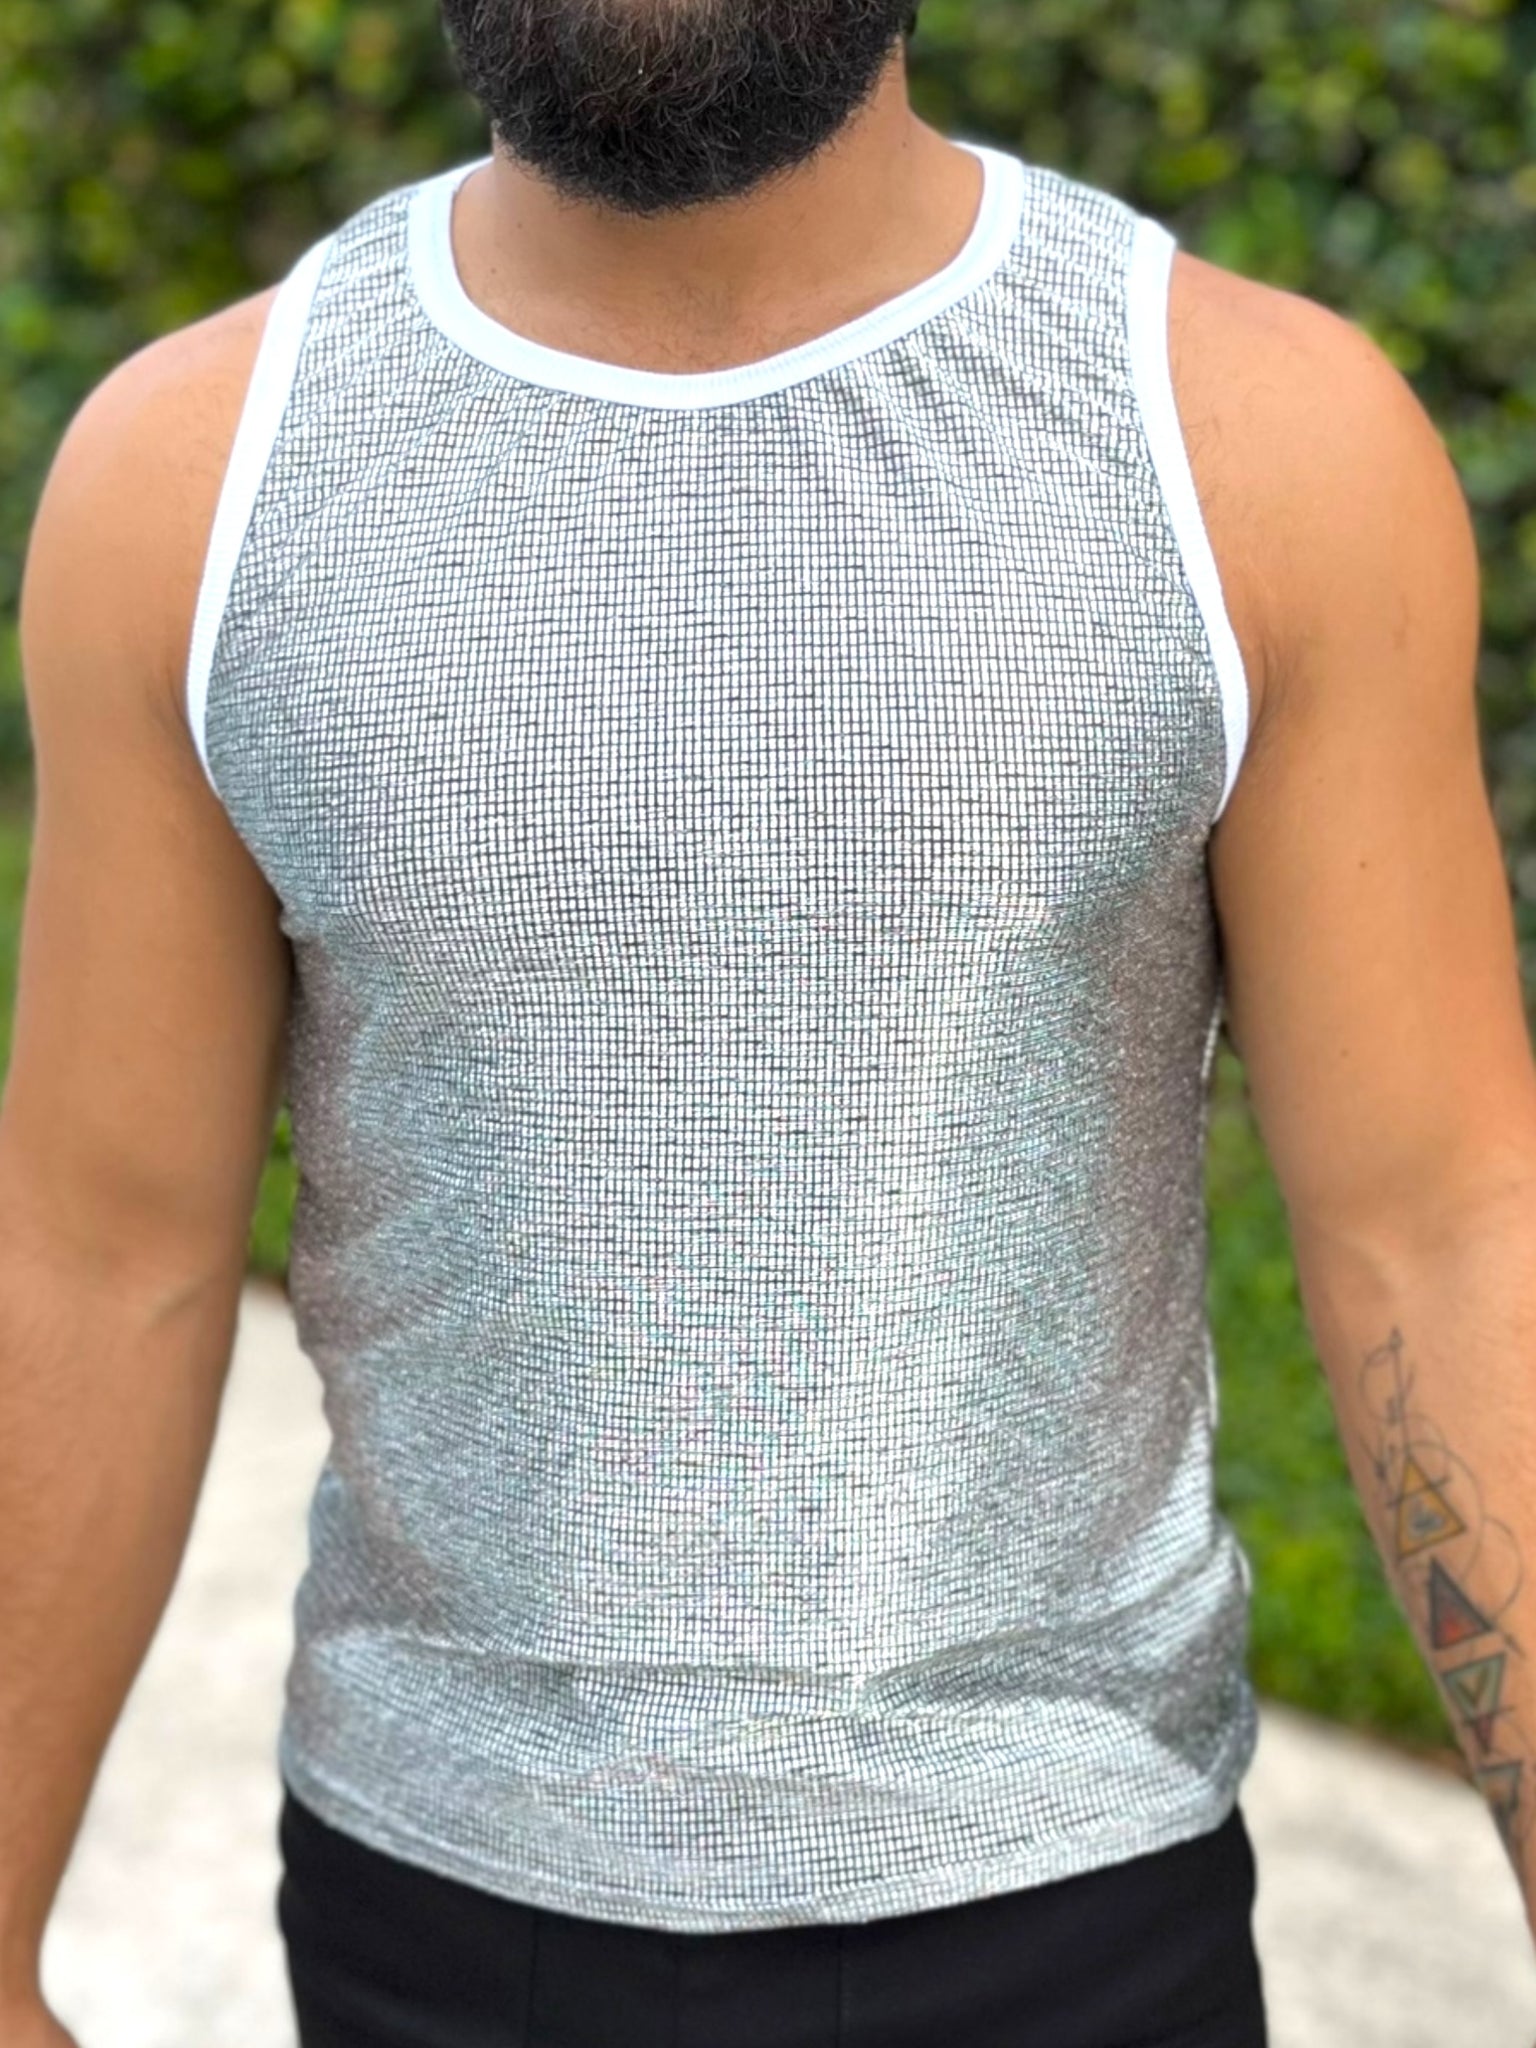 Chain Mail Reflective Stretch Mesh Tank Top